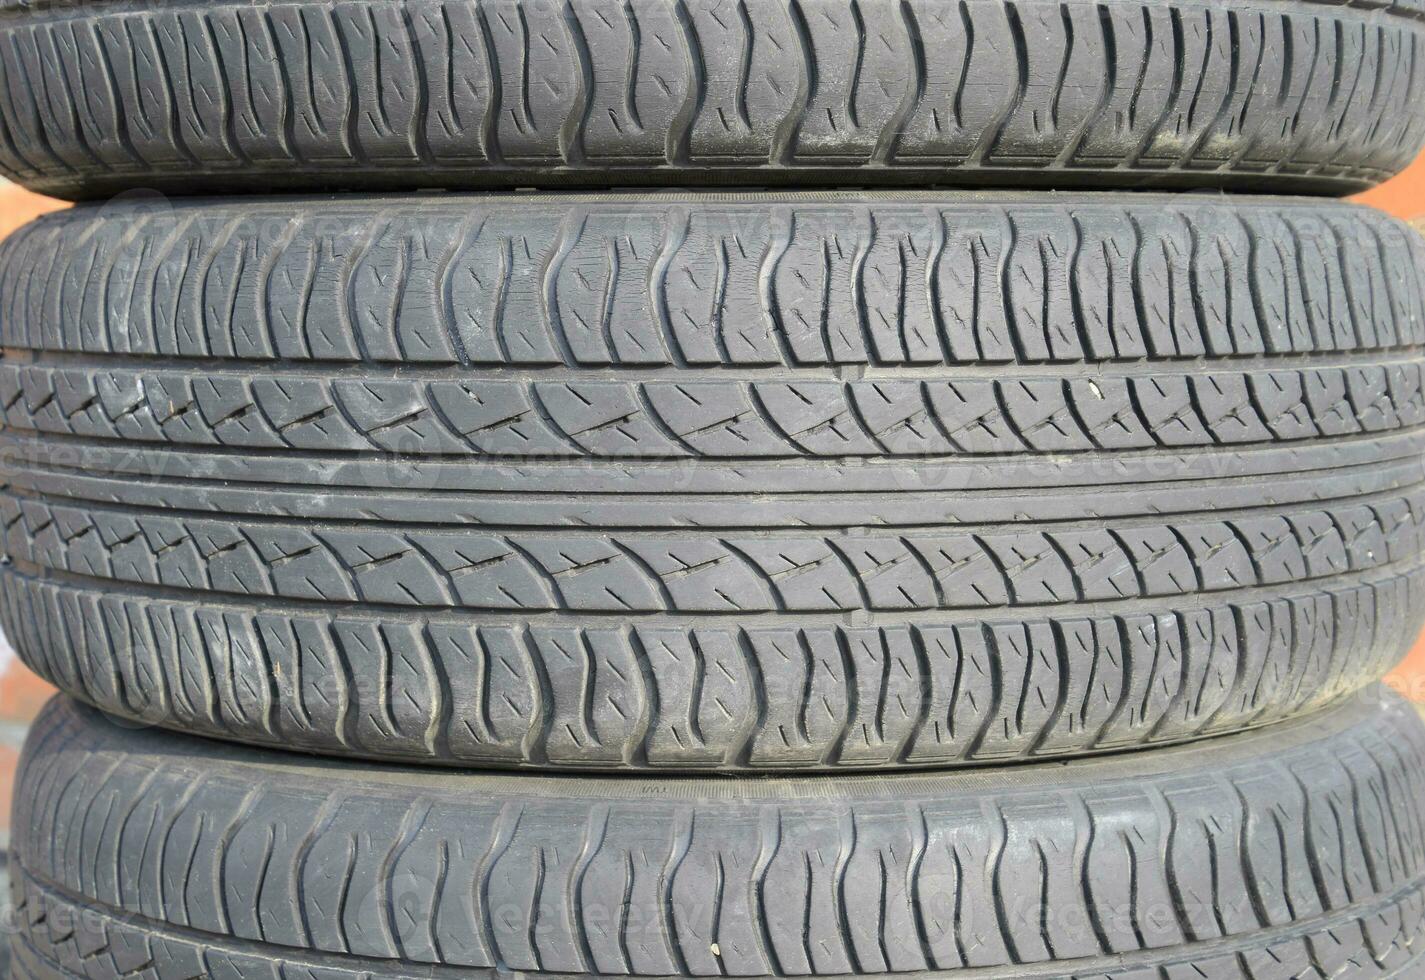 The background of the tread pattern of the car wheel. Rubber tir photo